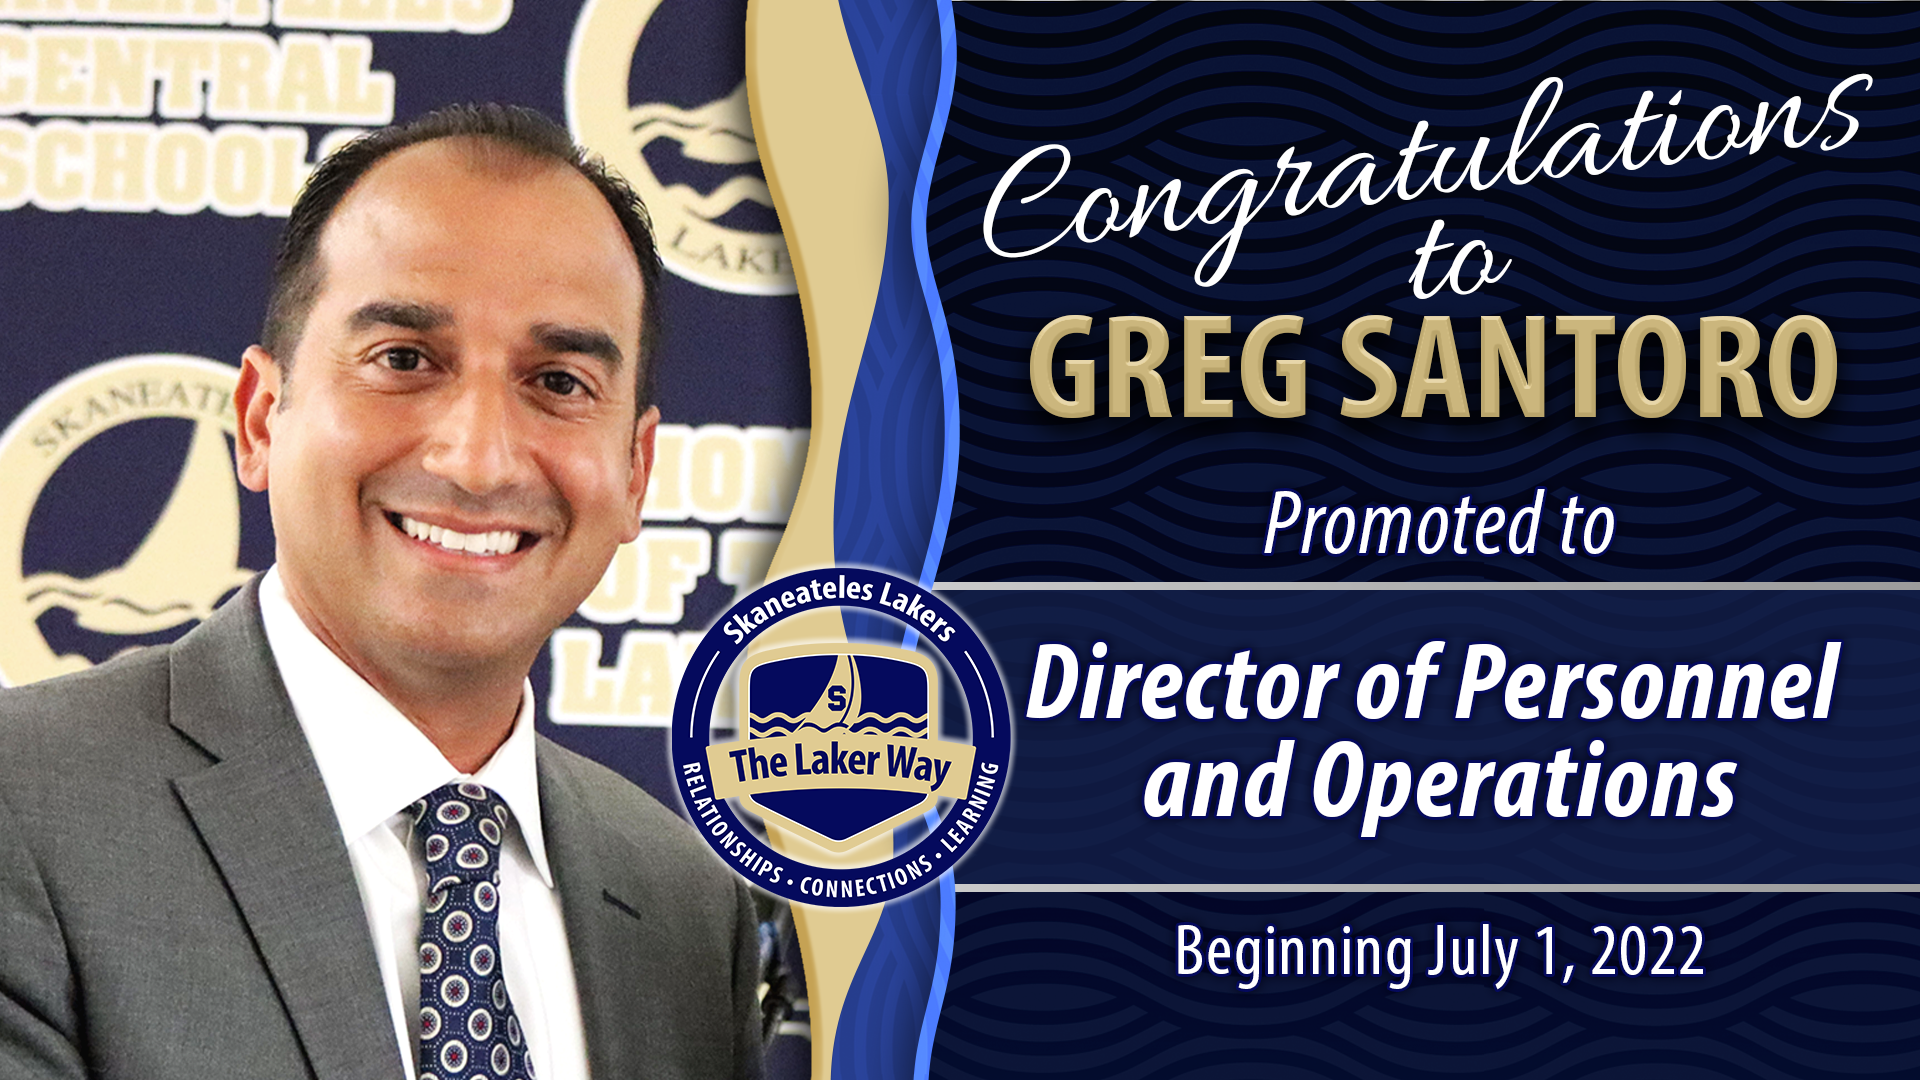 Greg Santoro Promoted to Director of Personnel and Operations